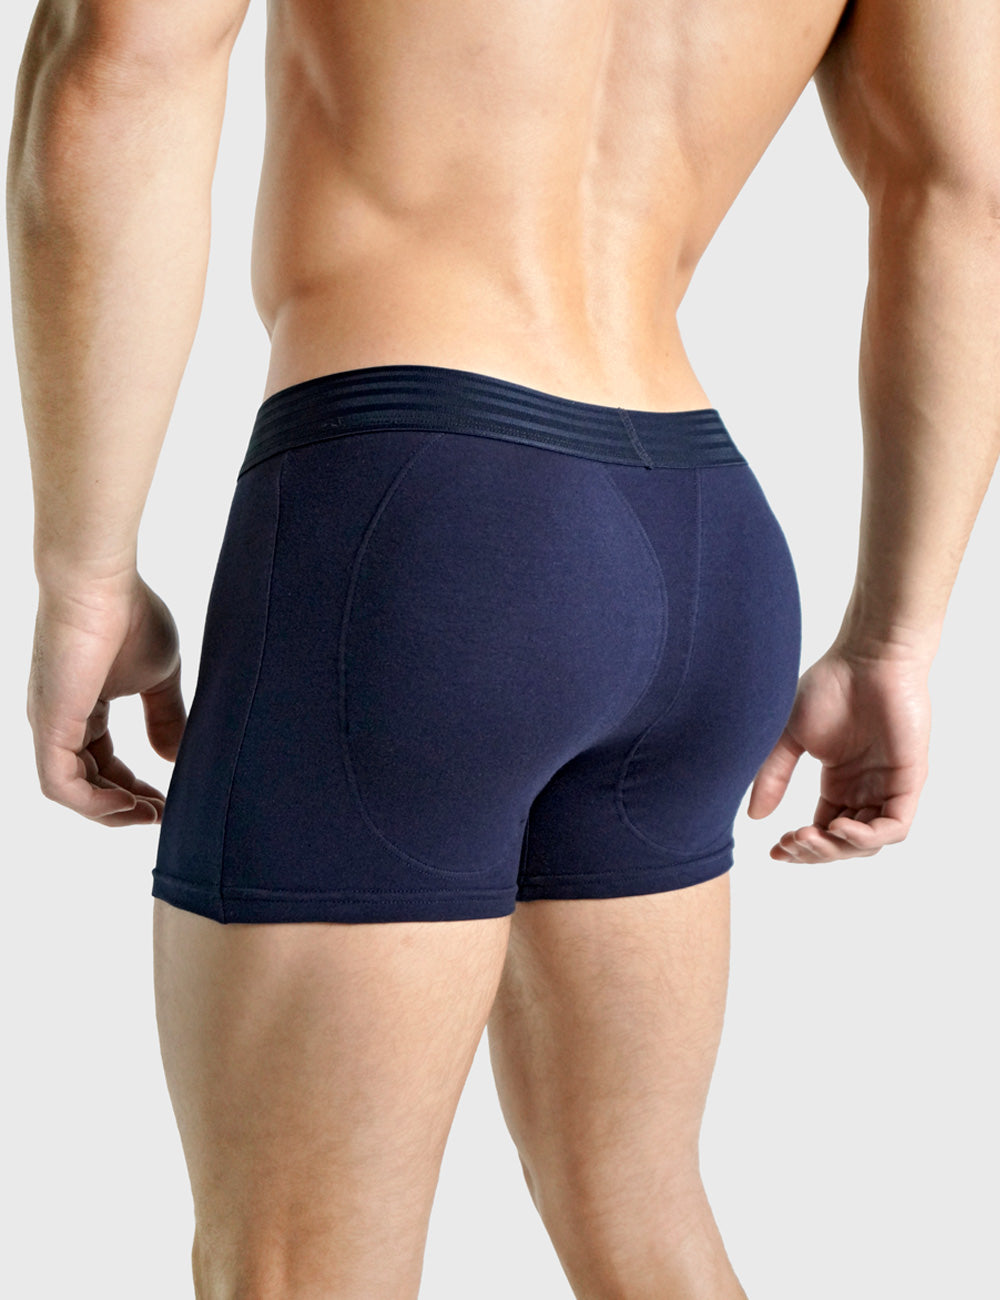 Padded Boxer Brief + Smart Package Cup – Rounderbum LLC